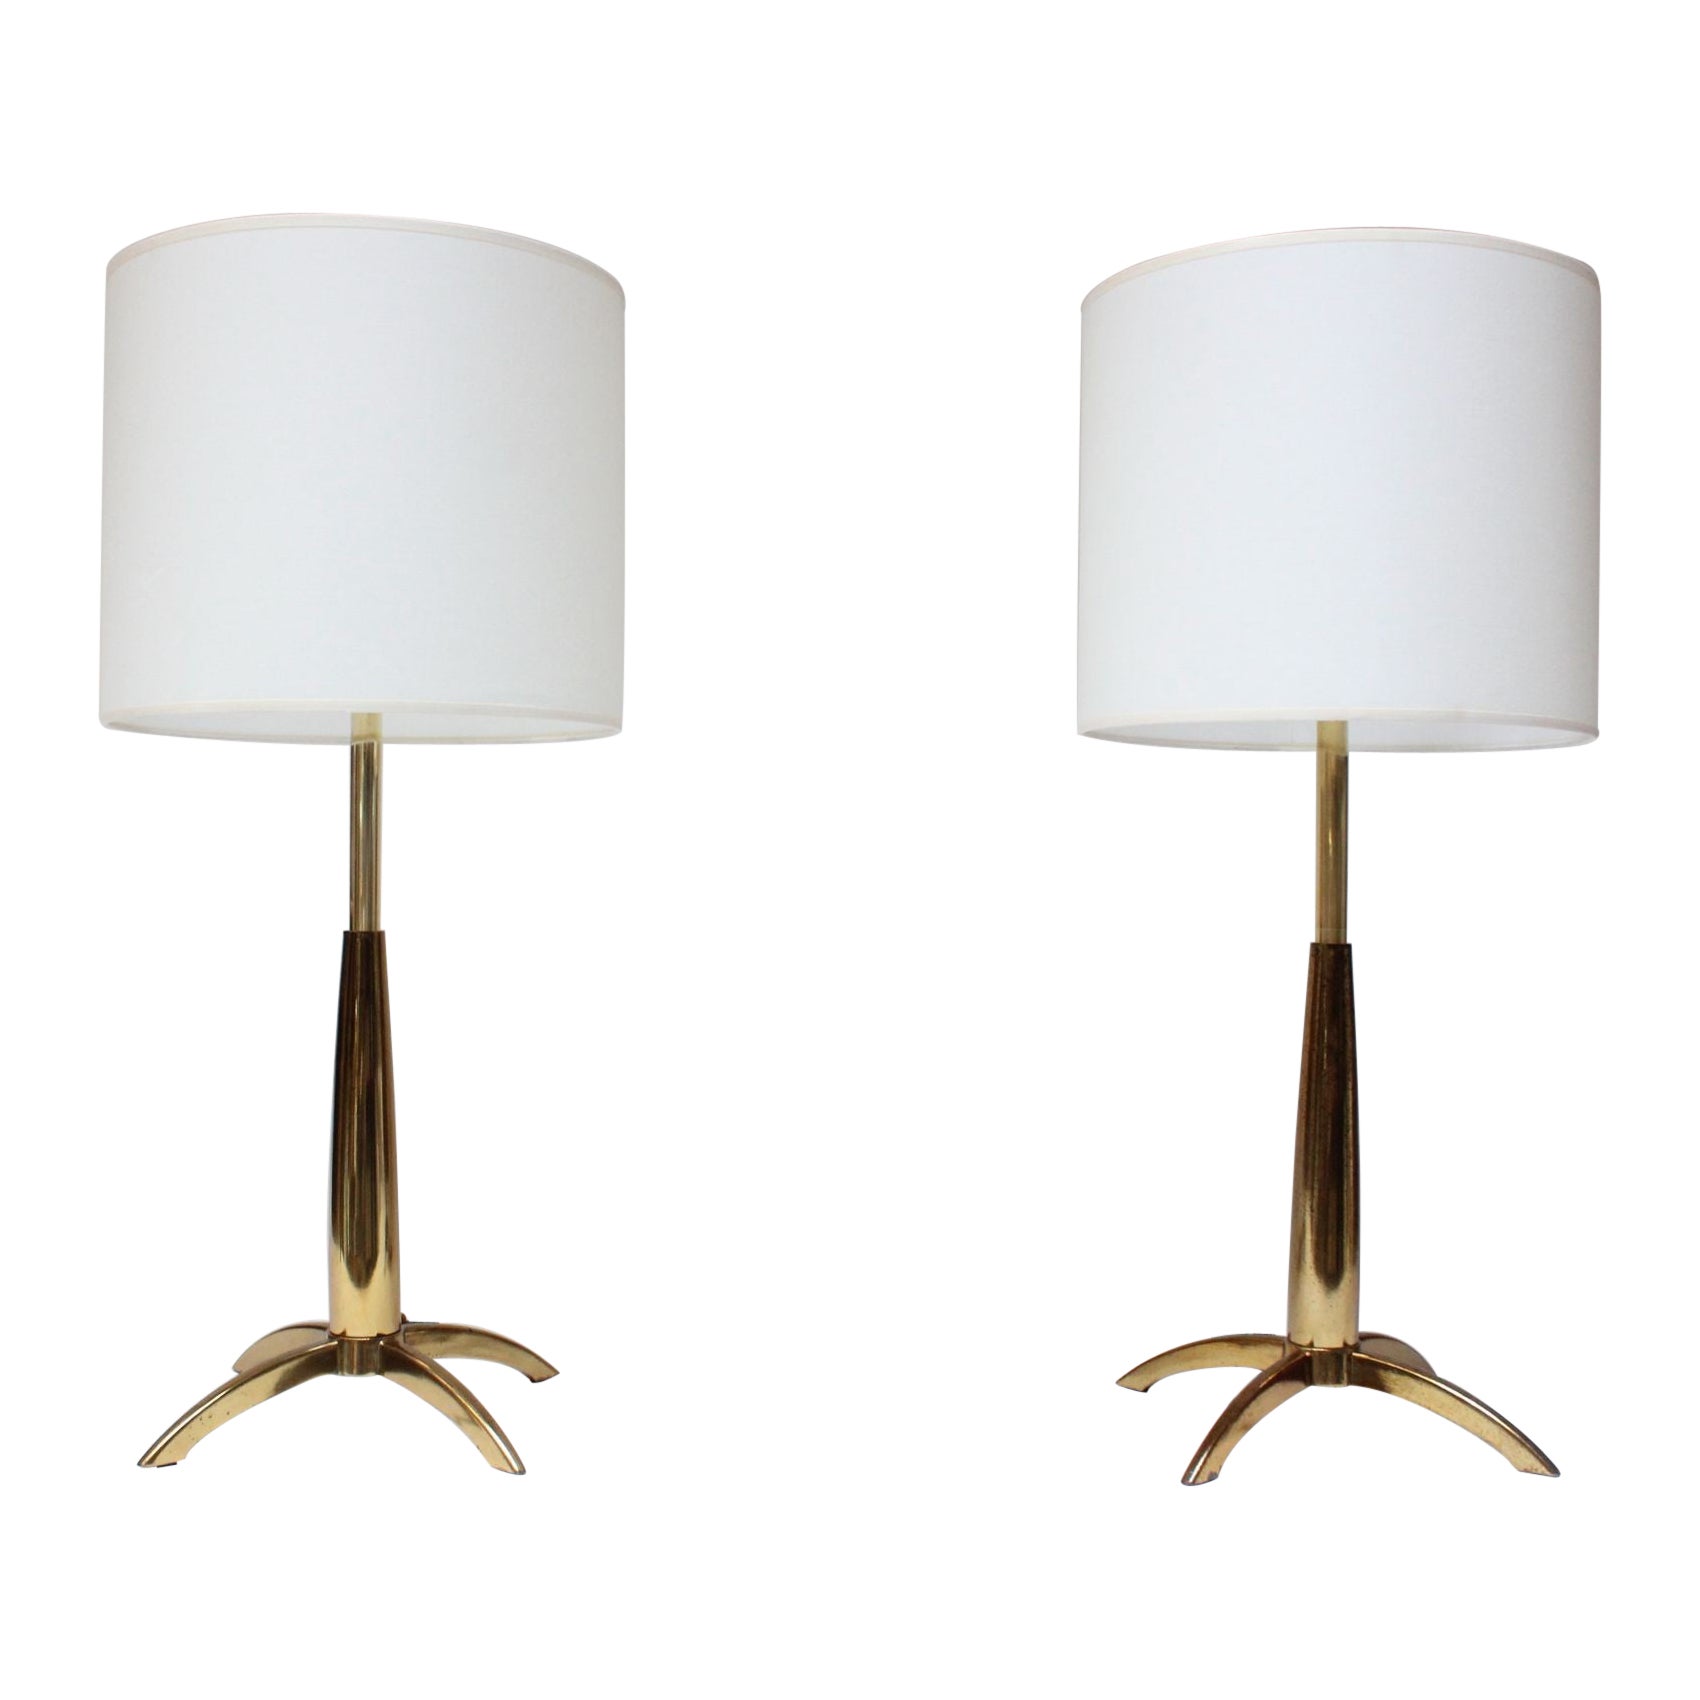 Pair of Mid-Century Stiffel "Rocket" Table Lamps in Brass